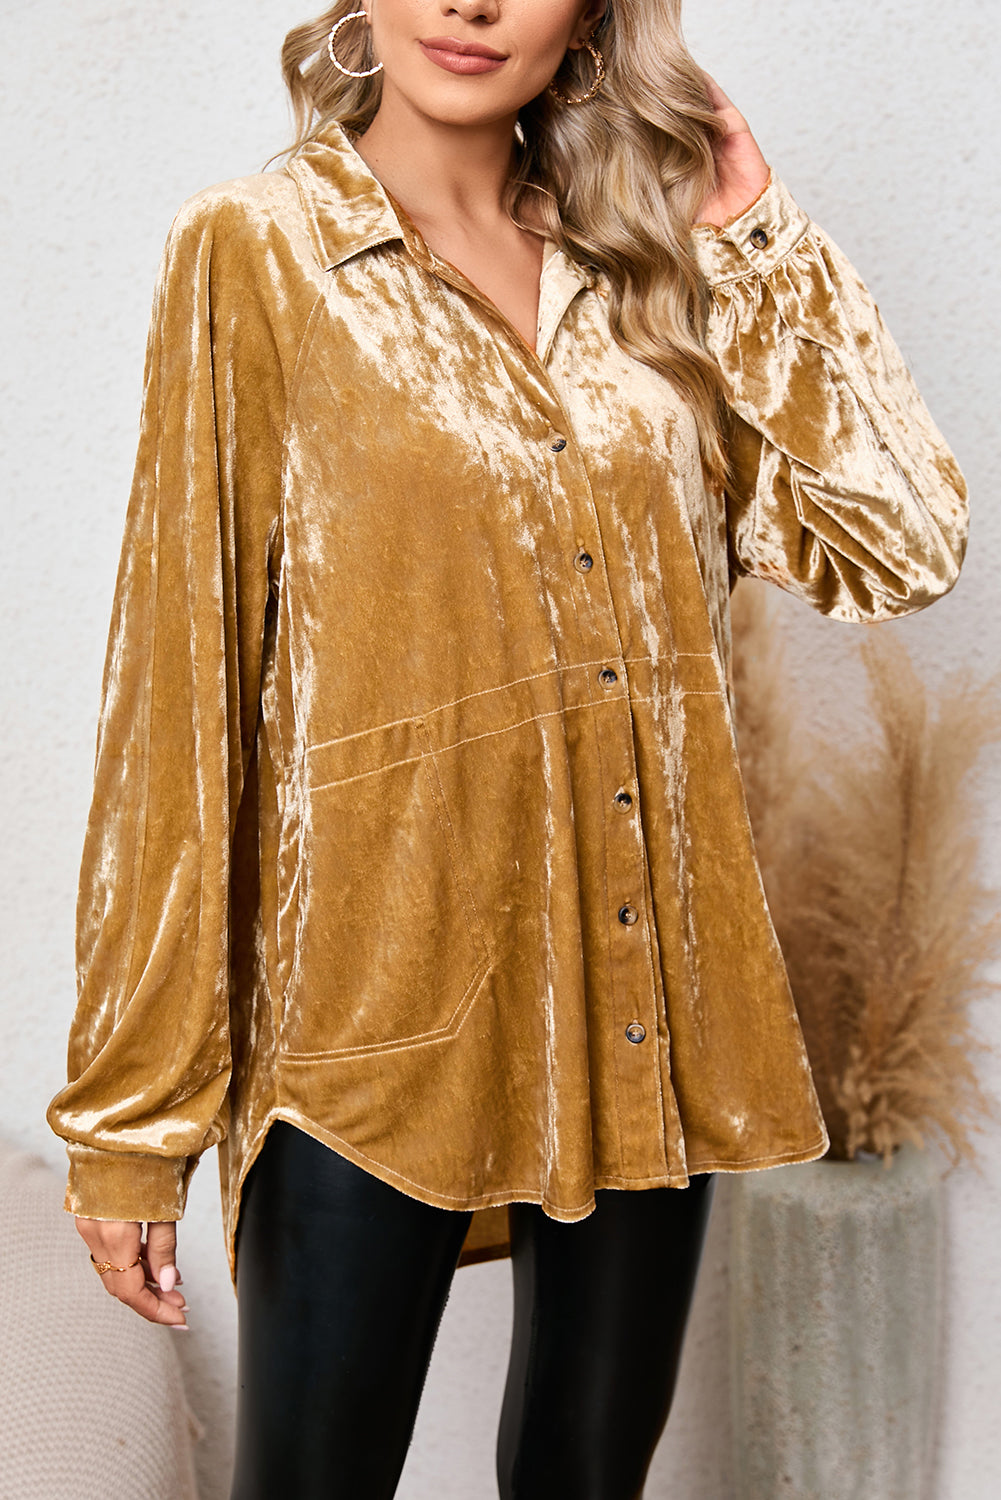 Gold Solid Color Long Sleeve Vintage Button Up Shacket